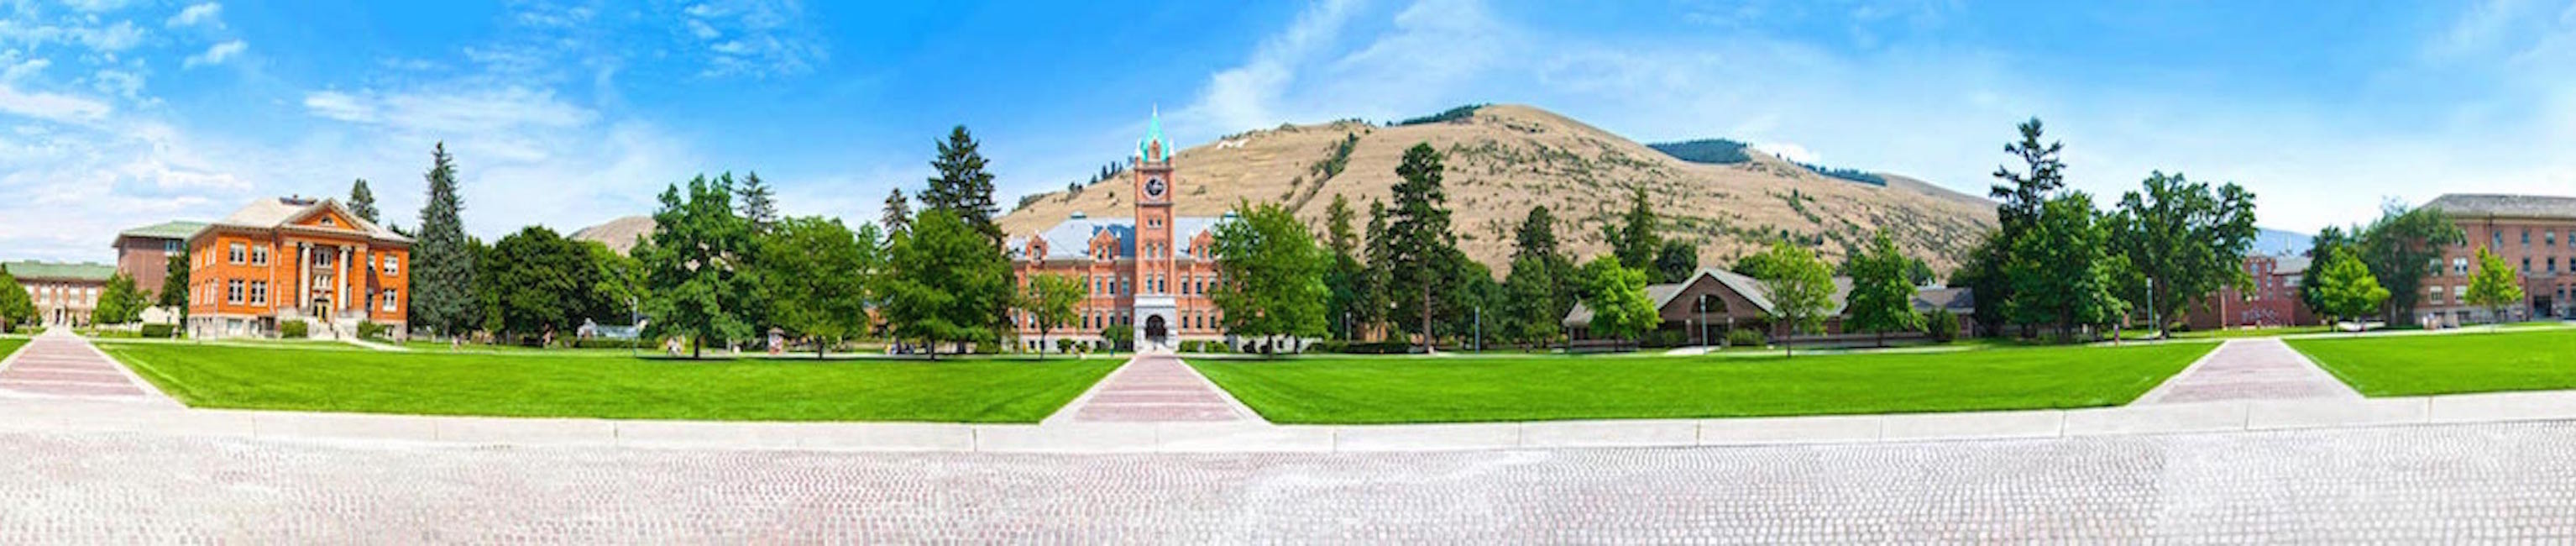 Most Beautiful College in Each State - University of Montana